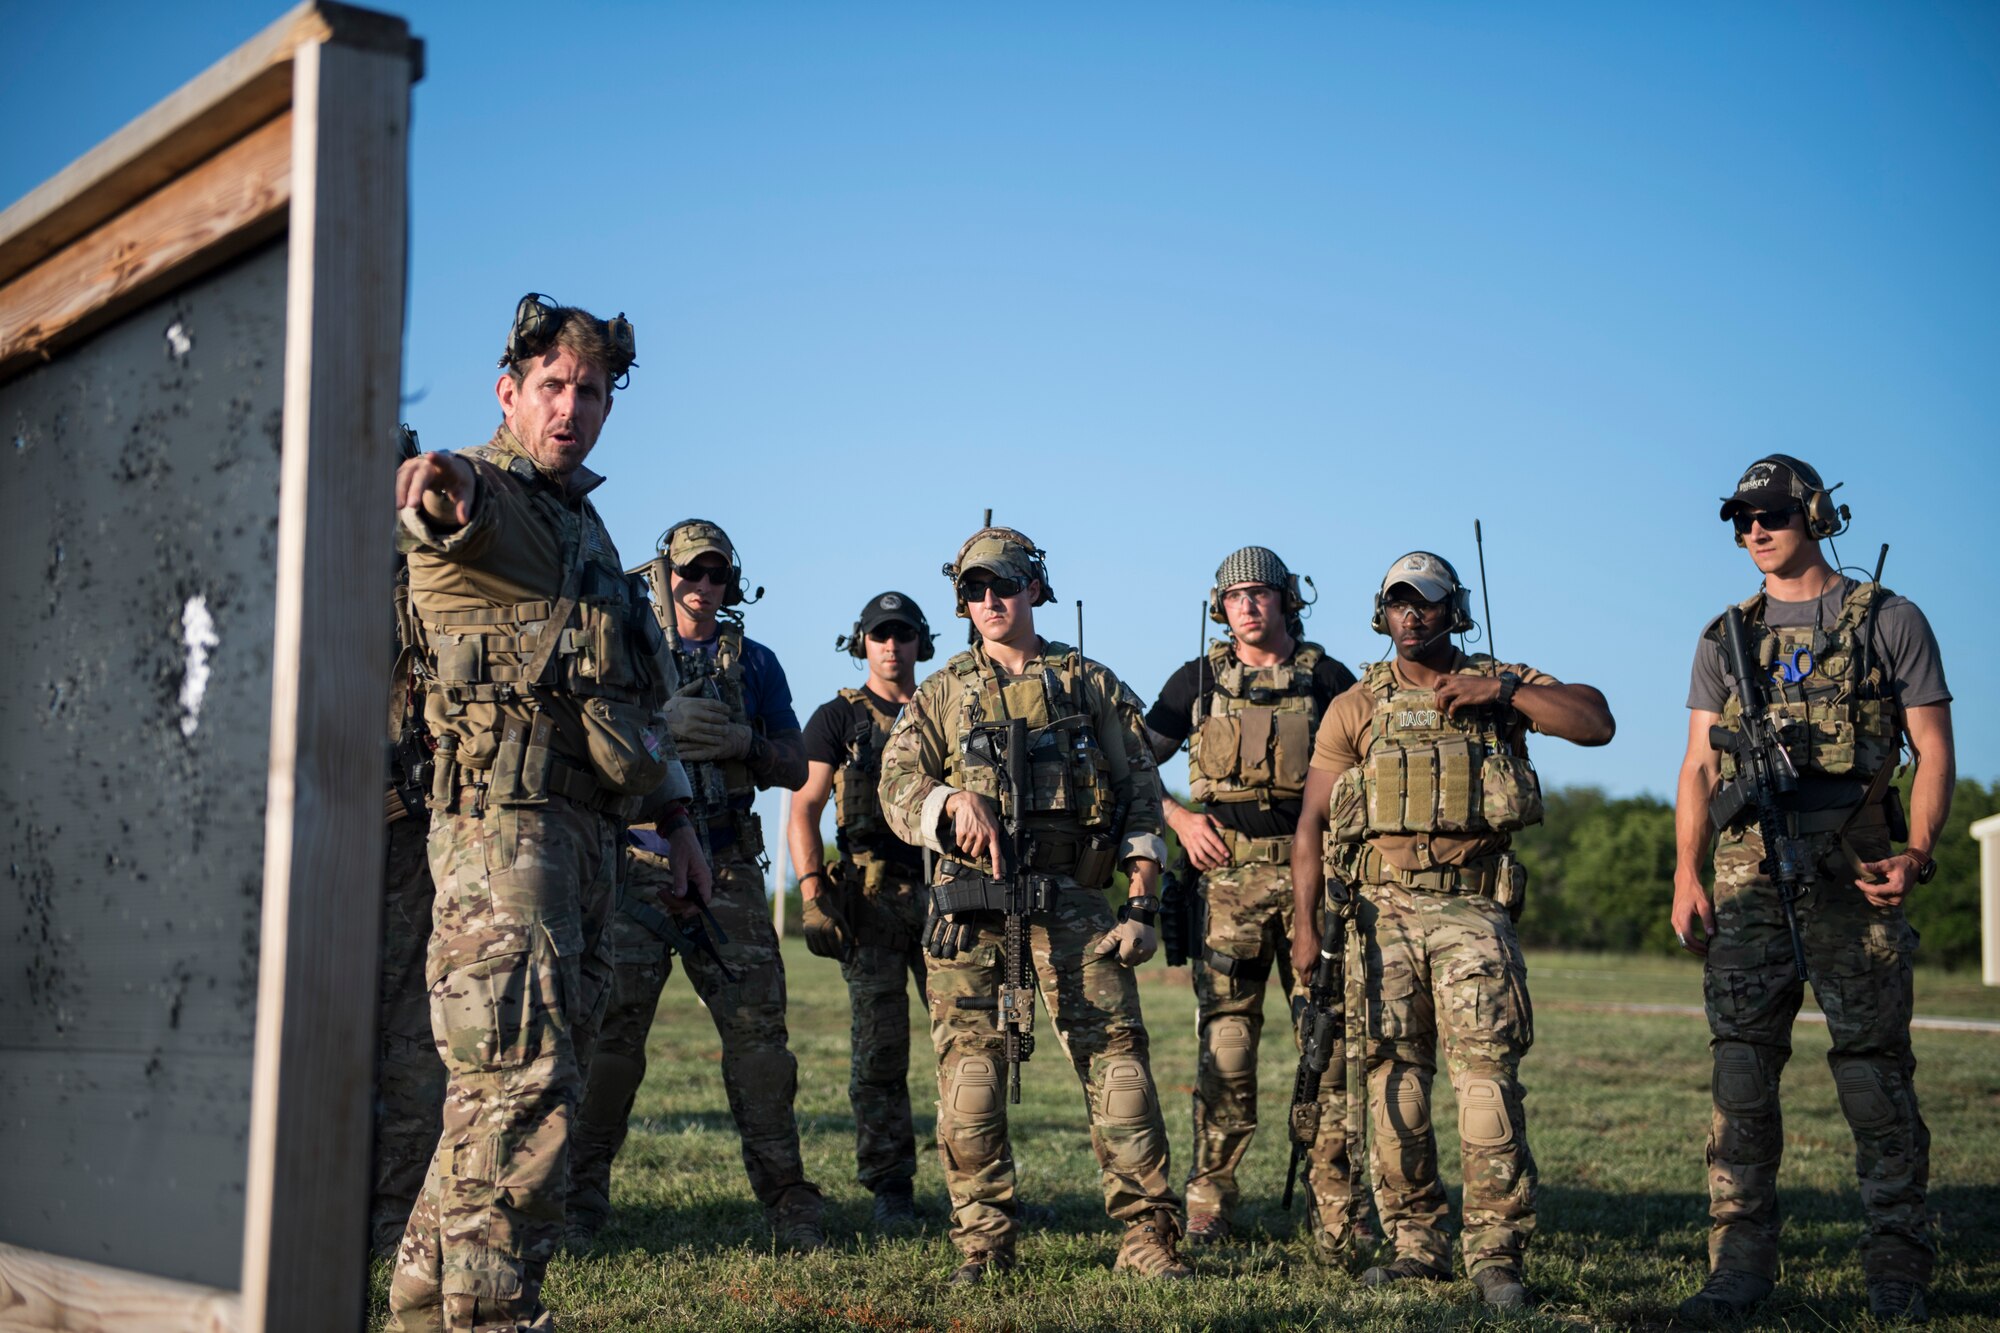 Brian Hartman, left, chief instructor, explains target groupings to students during a full spectrum operator course, Aug. 29, 2018, at Smoky Hill Air National Guard Range, Kan. The course was held Aug. 26-31, and incorporated specific duties performed by tactical air control party members and security forces personnel to build on their gunfighting skills. (U.S. Air Force photo by Senior Airman Janiqua P. Robinson)